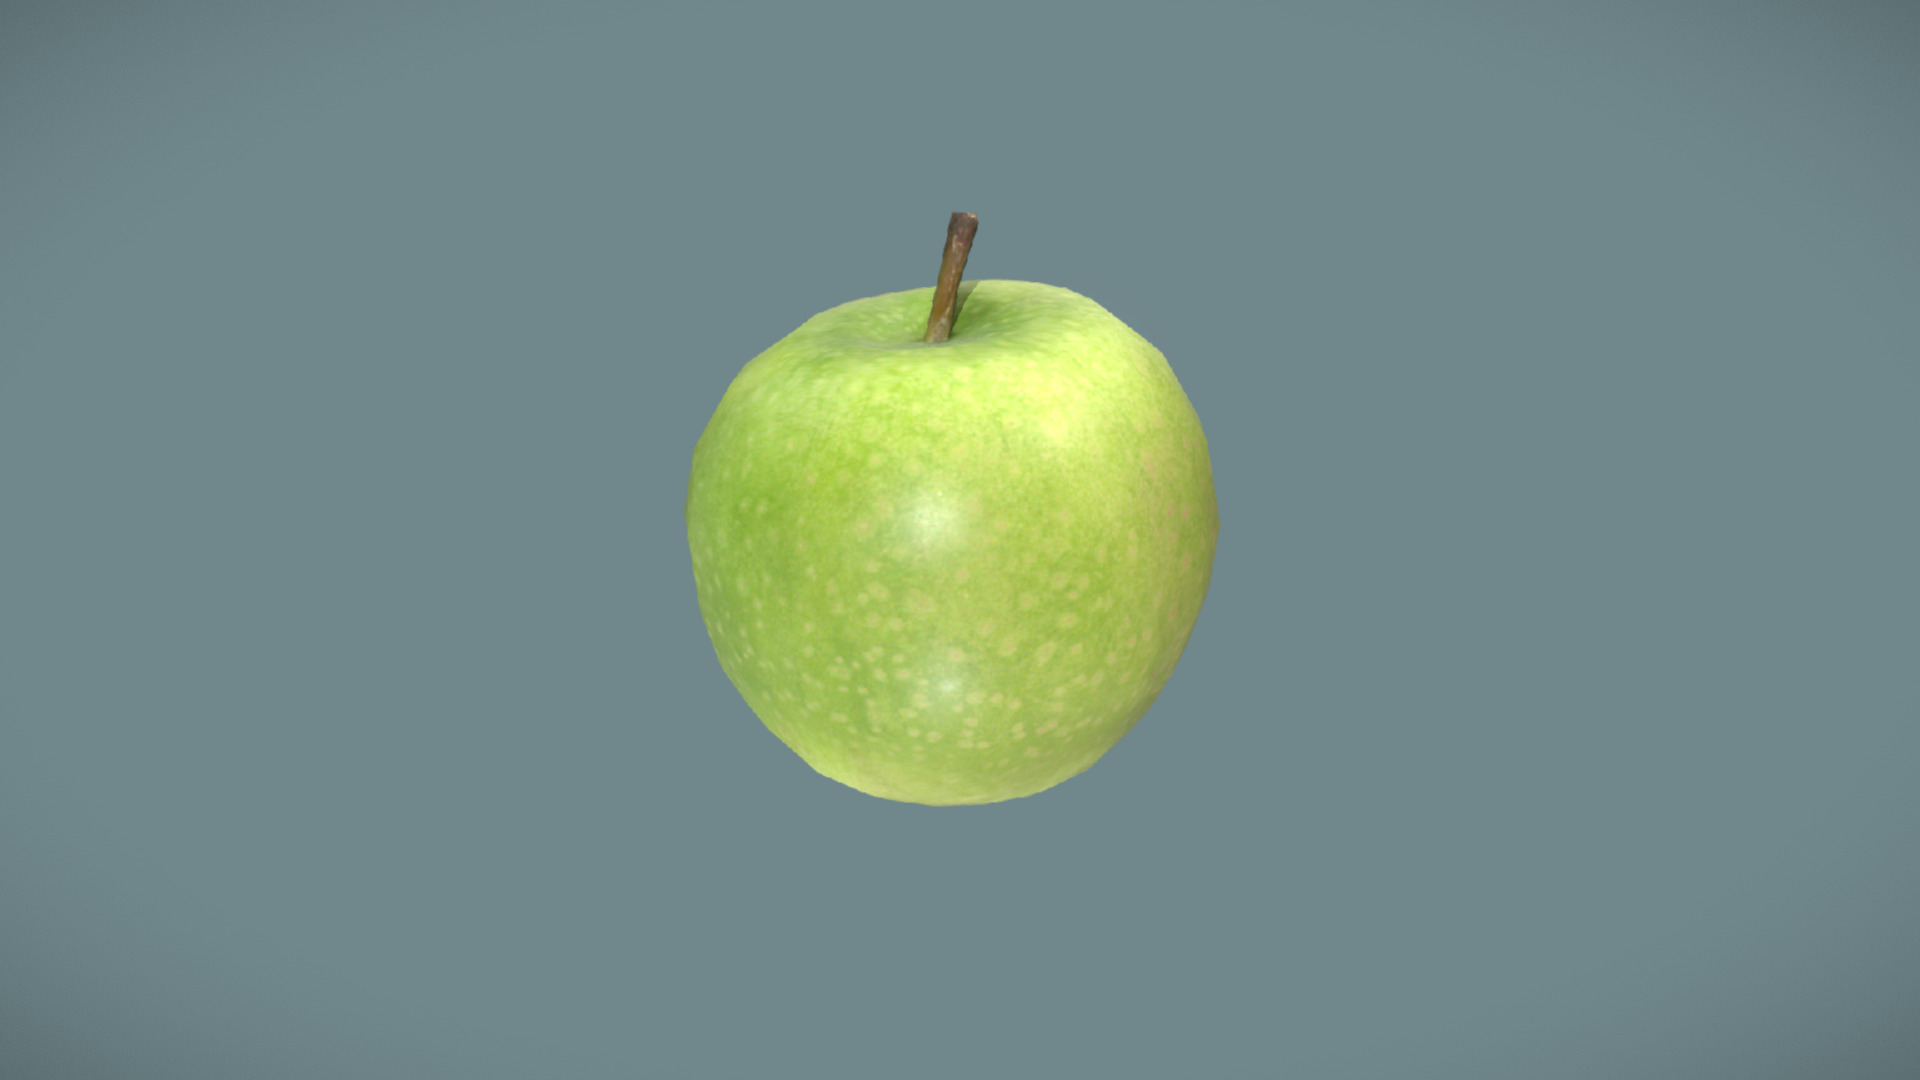 3D model An Apple! - This is a 3D model of the An Apple!. The 3D model is about a green apple on a blue background.